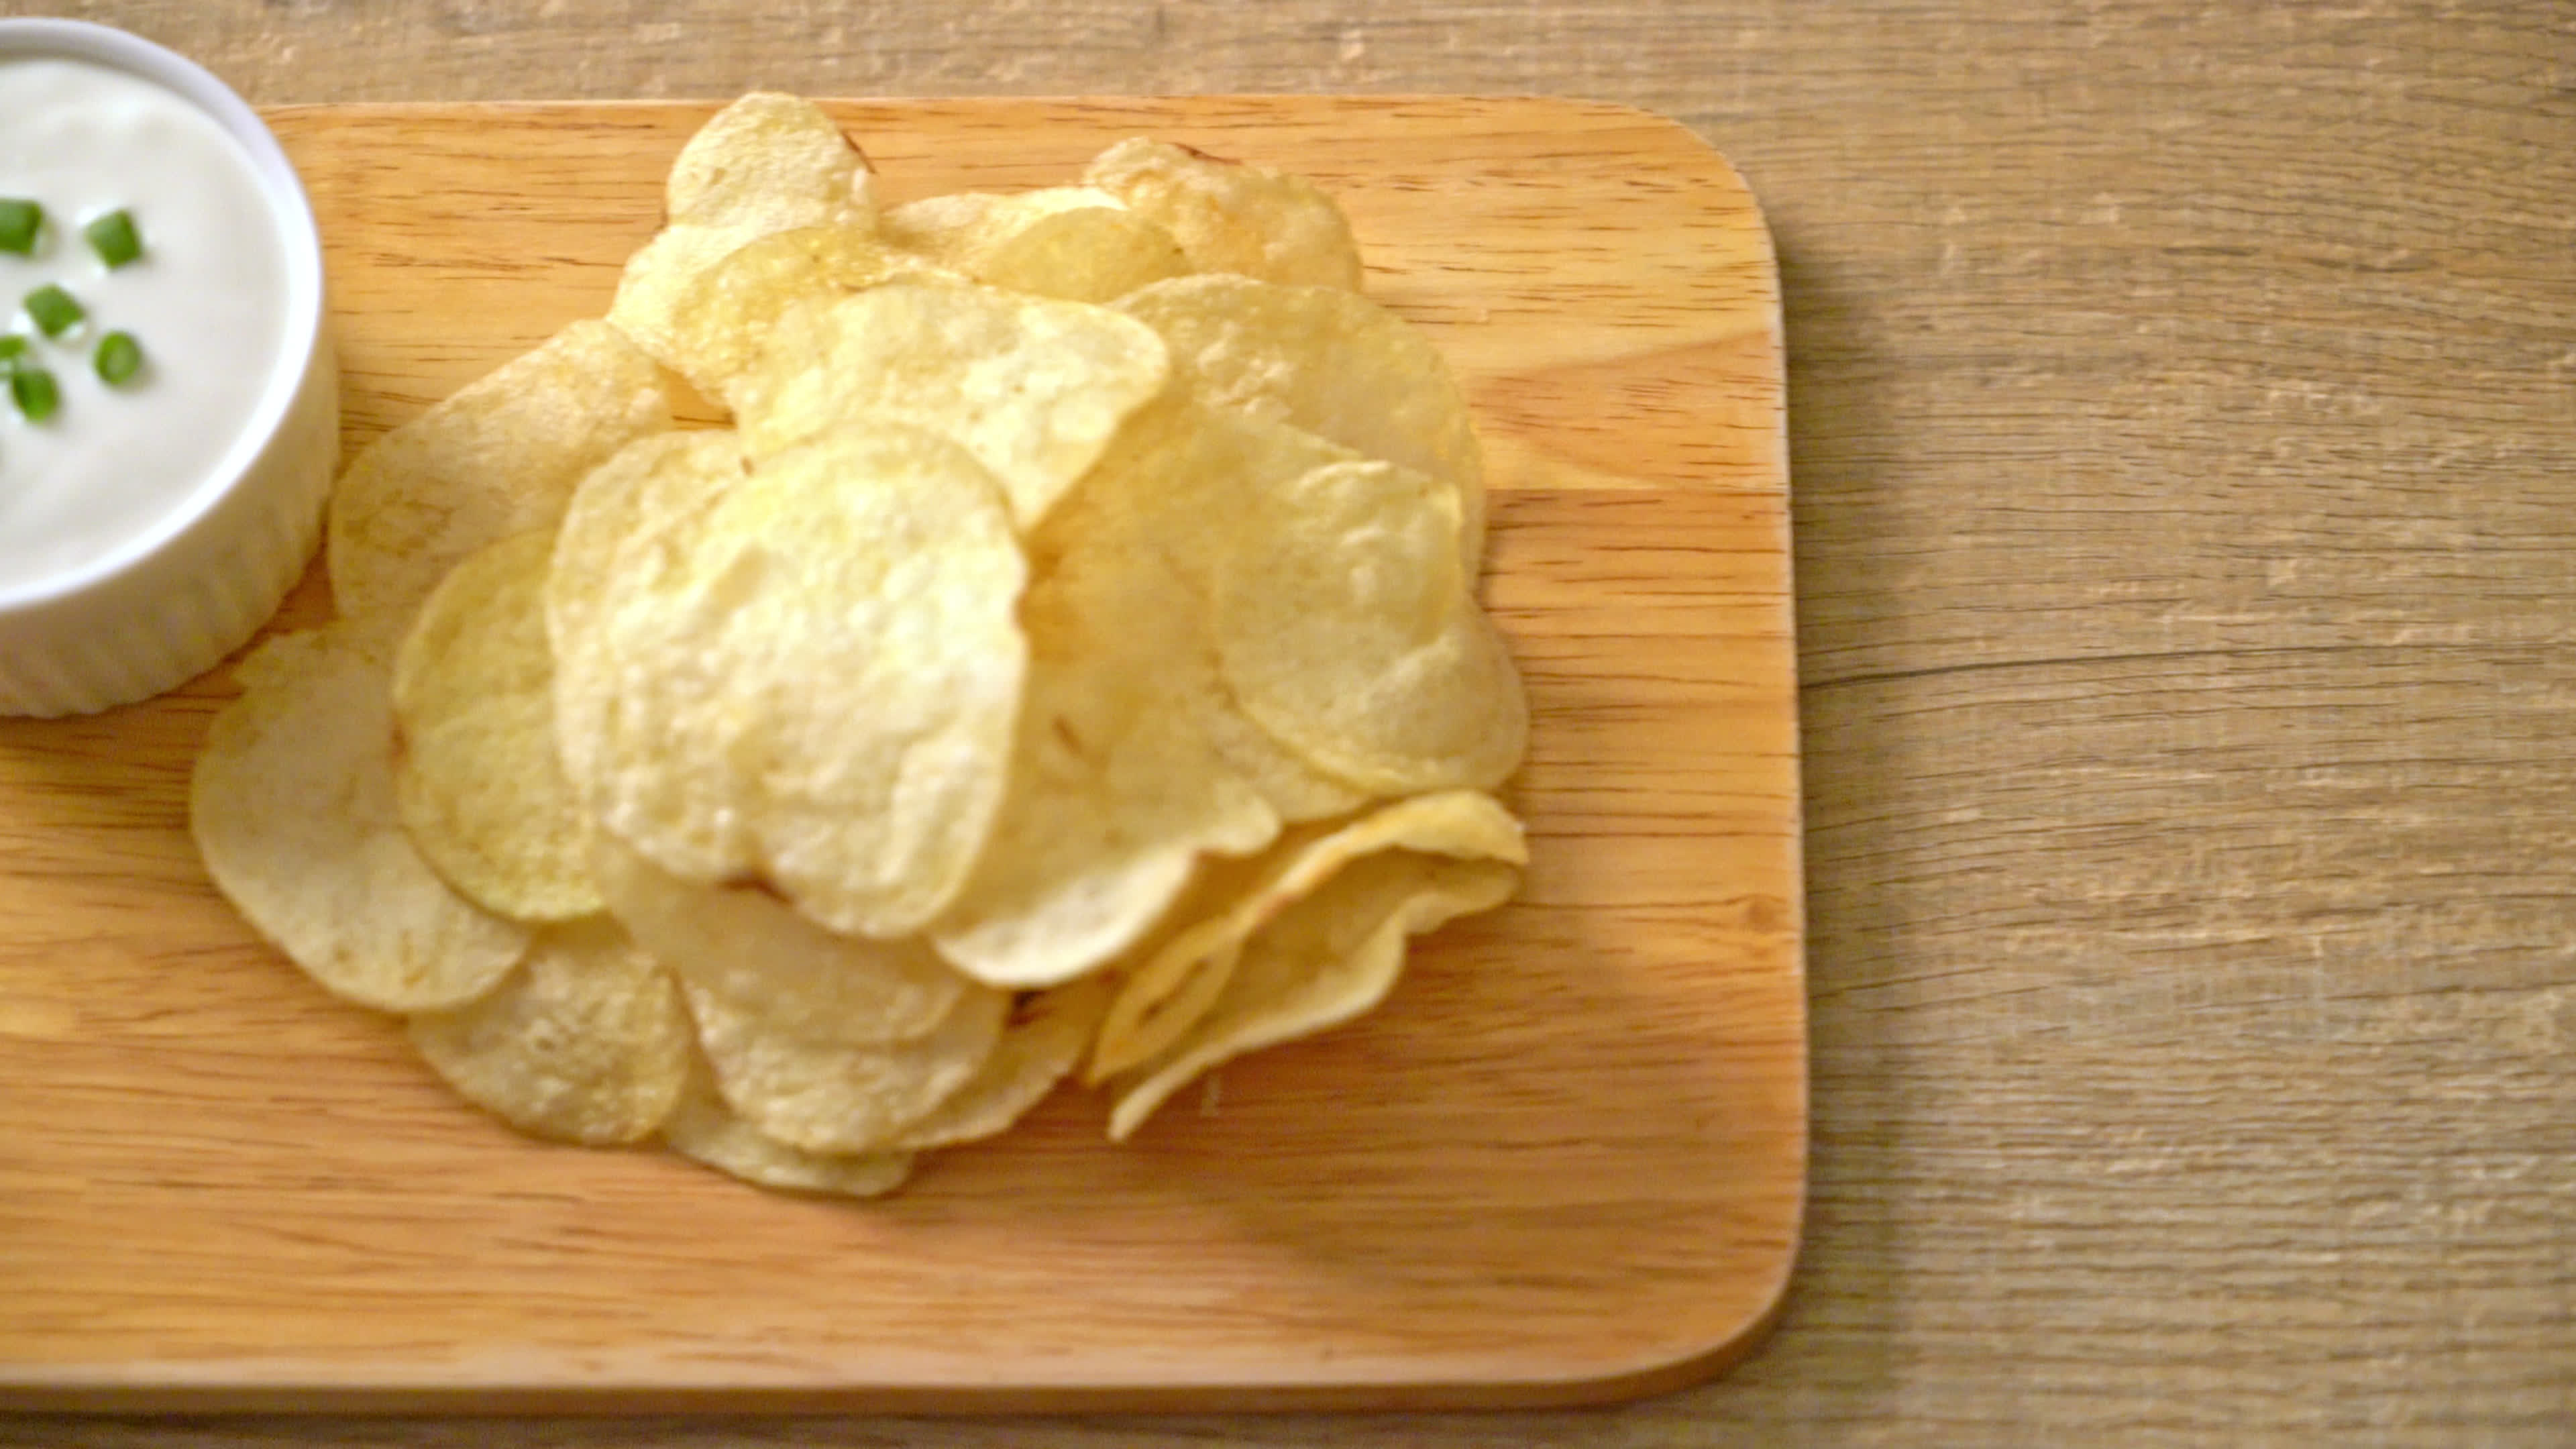 Potato chips with dipping sauce, Irresistible snack, Stock video footage, Craving satisfaction, 3840x2160 4K Desktop